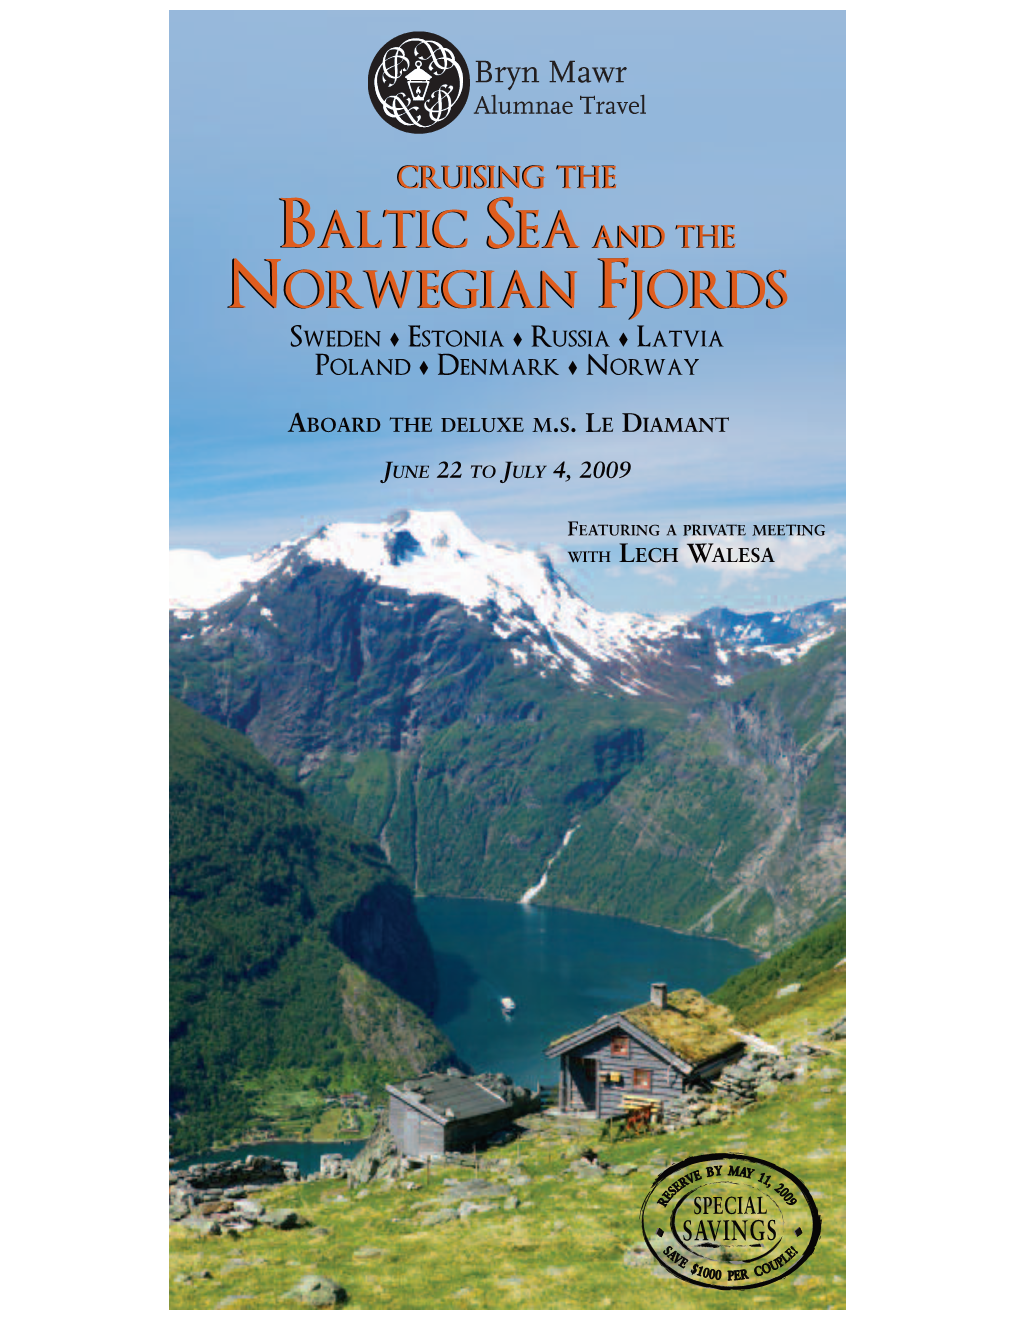 Baltic Sea and the Norwegian Fjords Program Has Sold out the Last Four Years, So We Urge You to Make Your Reservation While Special Savings Are Still Available